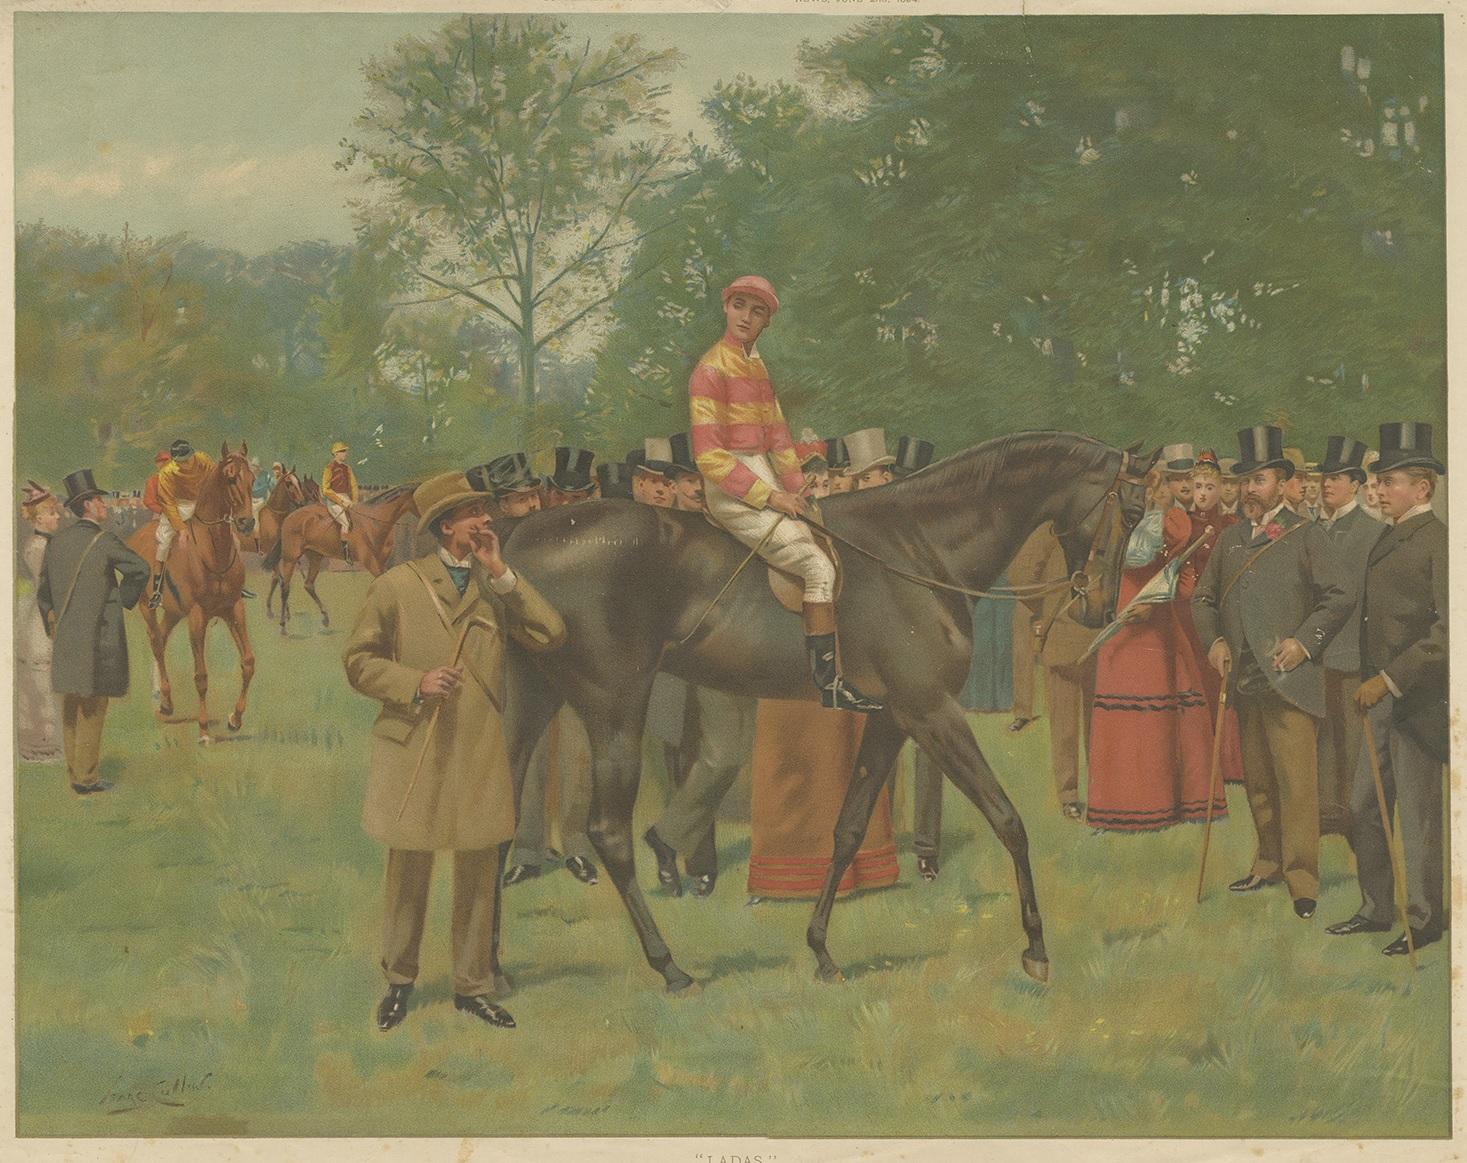 Antique print titled 'Ladas - Portrait of the Prime Minister's Favourite for the Derby, 1894'. Ladas (1891–1914) was a British Thoroughbred racehorse and sire. His career attracted an unusual amount of attention as his owner, Lord Rosebery, became